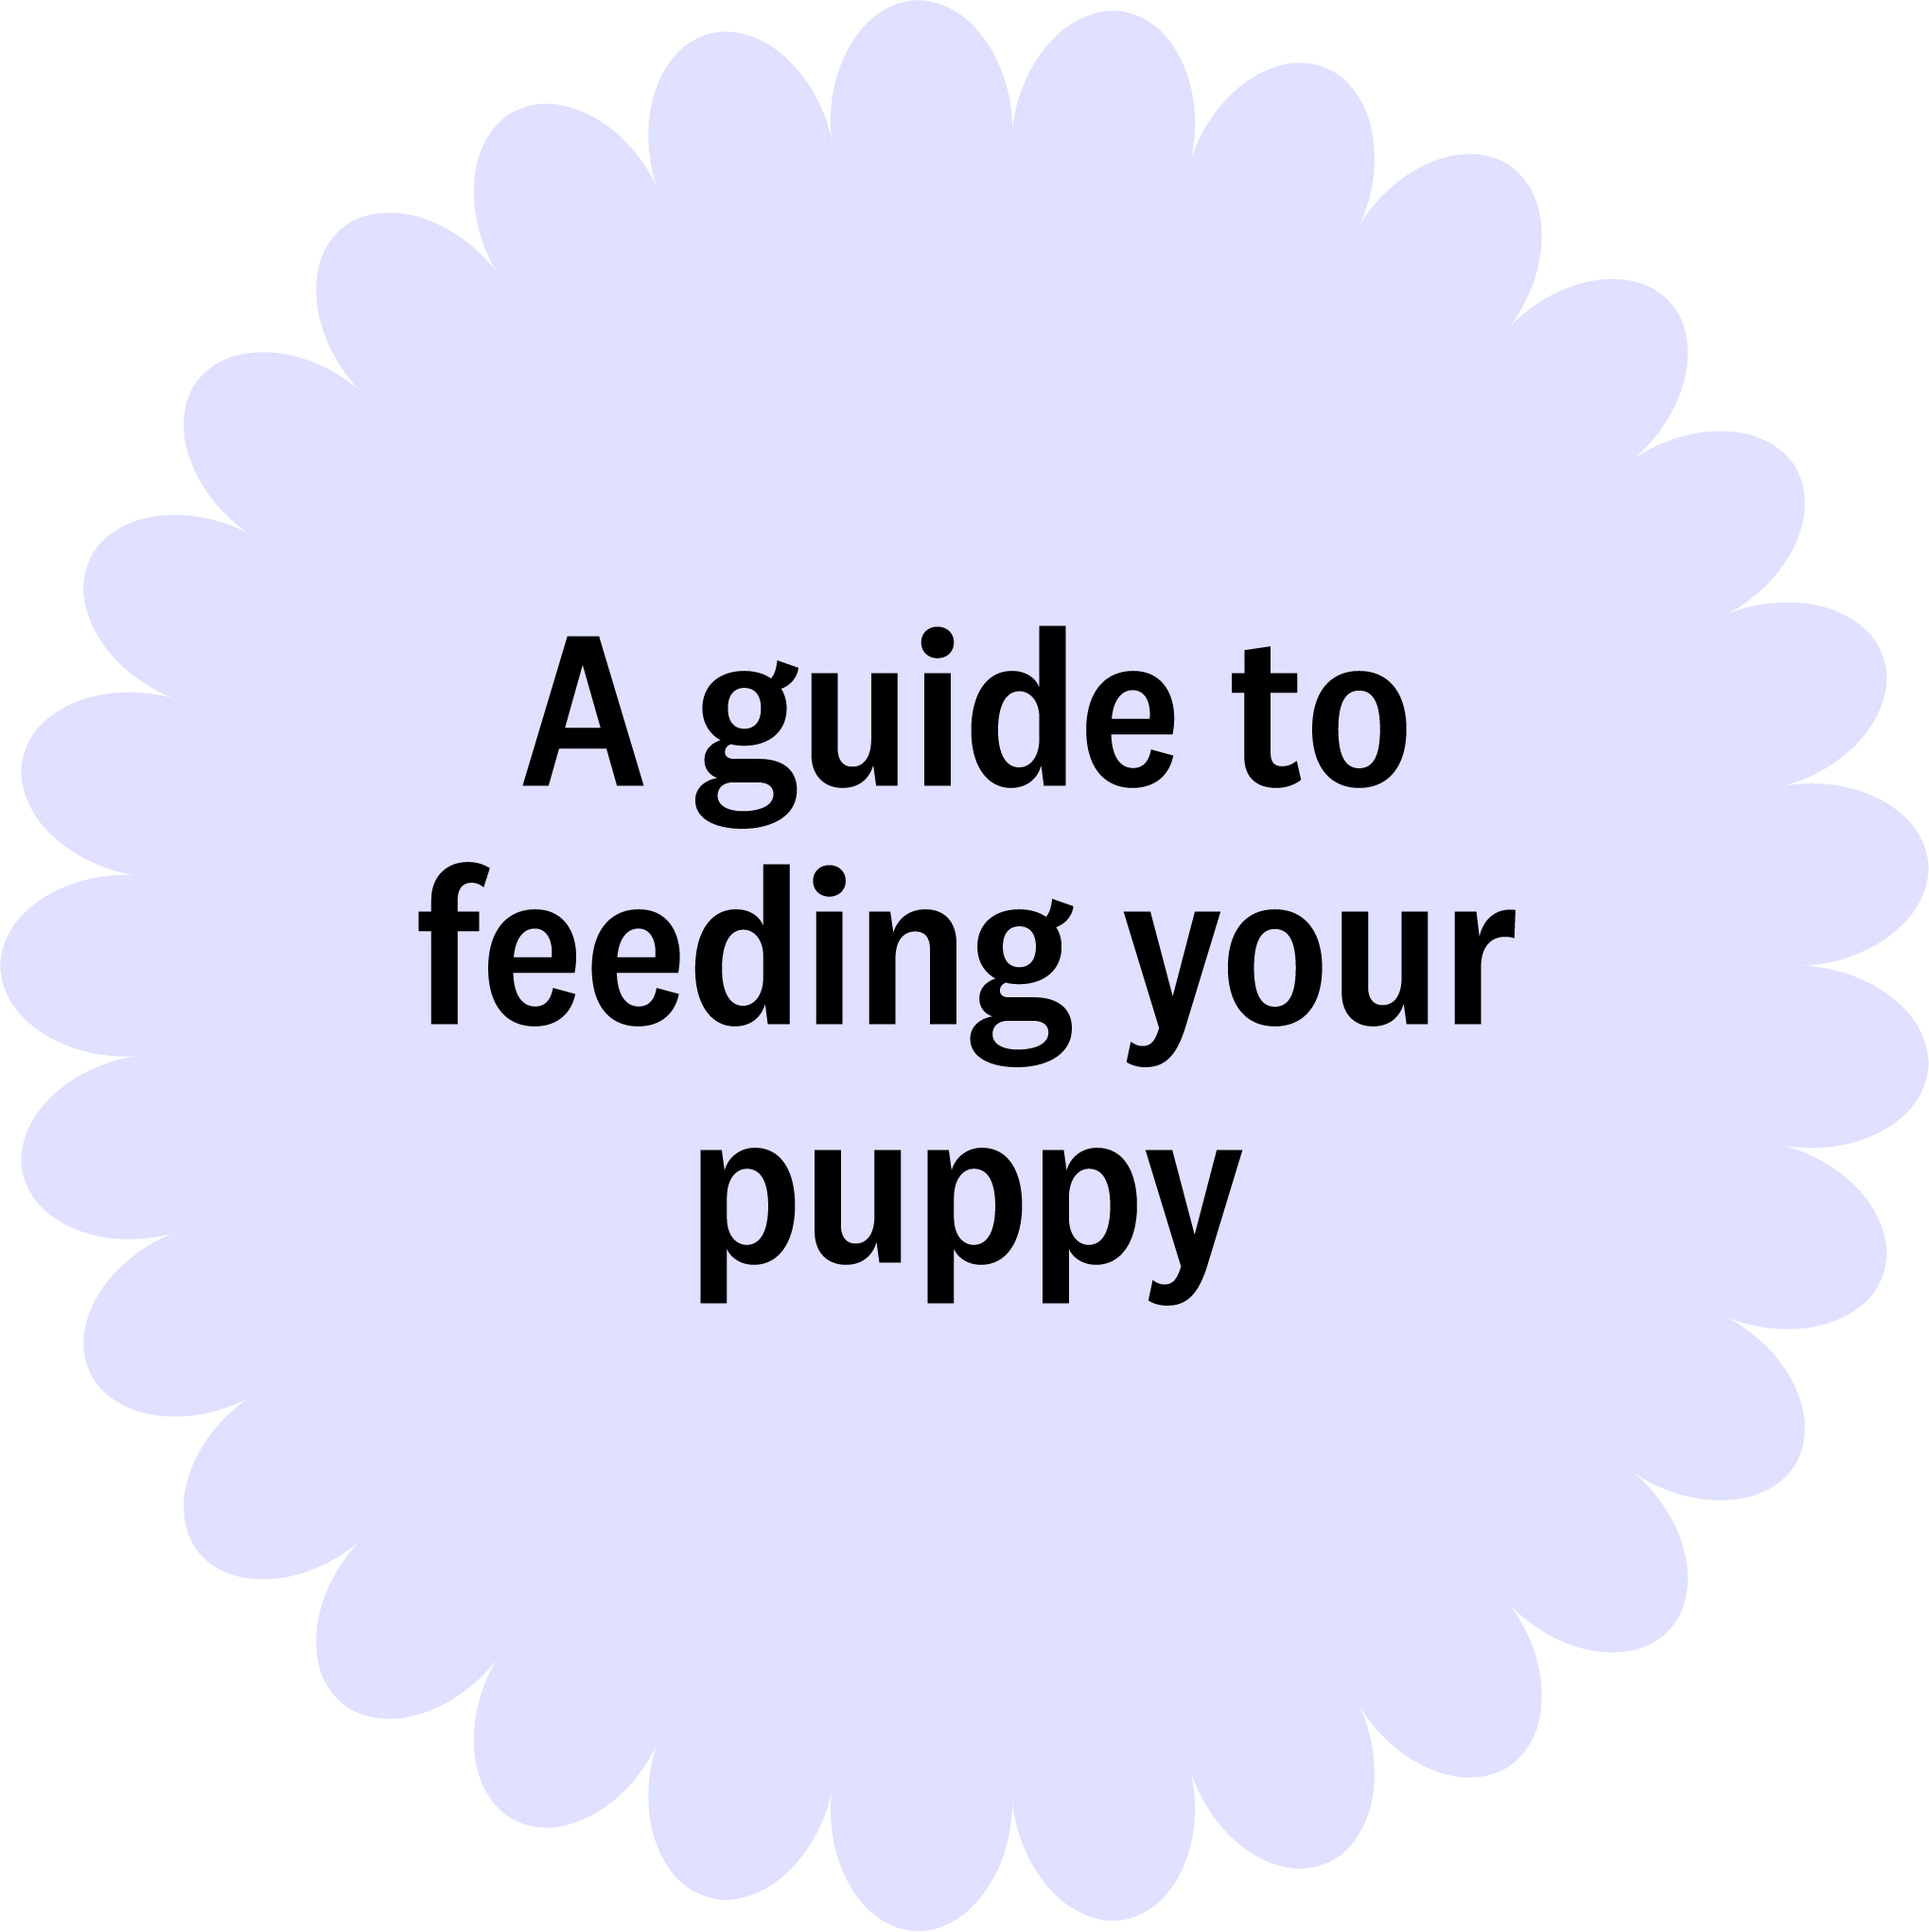 A guide to feeding your puppy